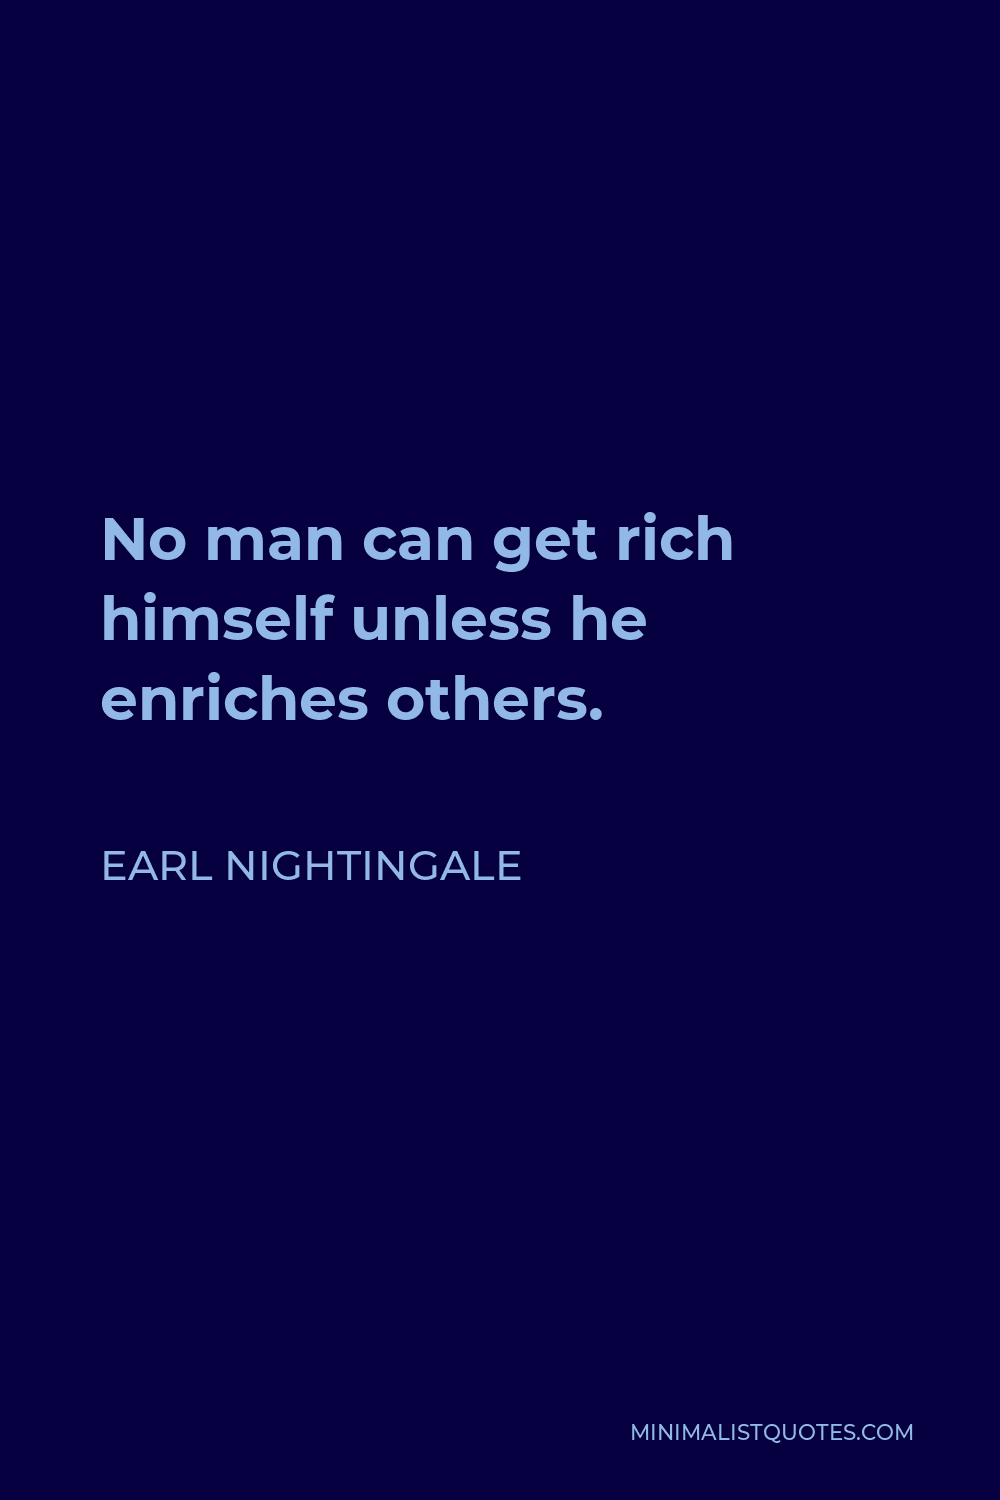 Earl Nightingale Quote - No man can get rich himself unless he enriches others.